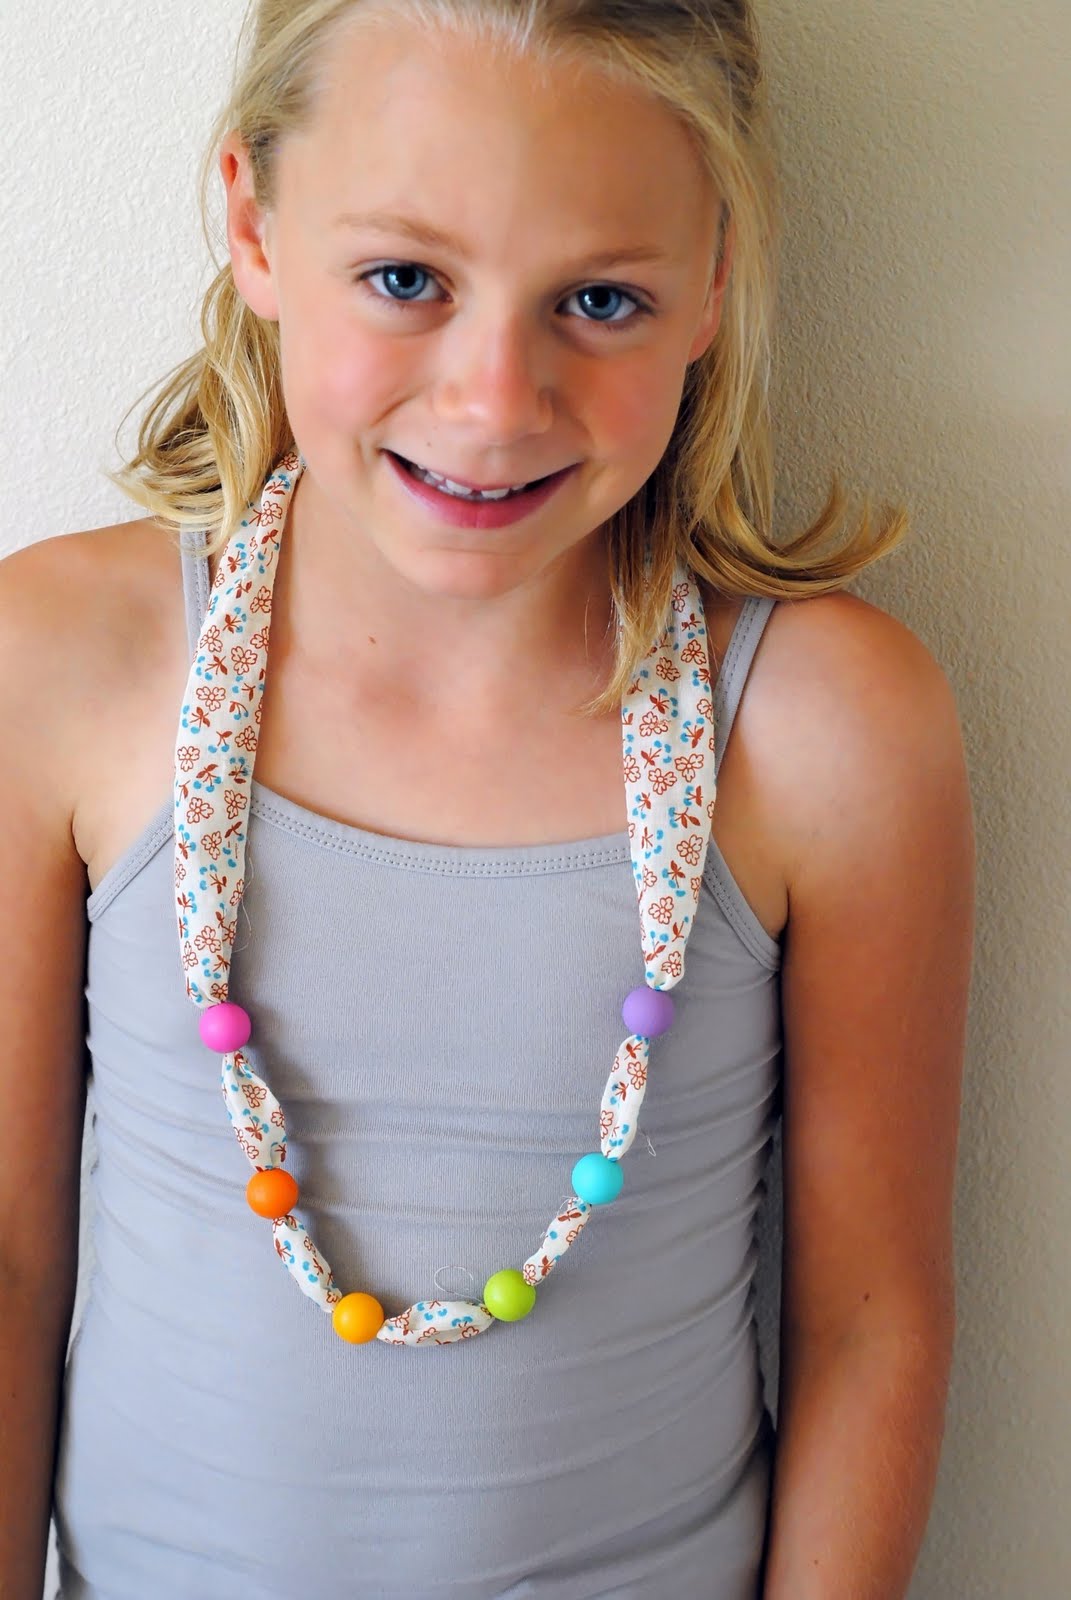 hart + sew | Vintage Baby Clothing: a simple necklace